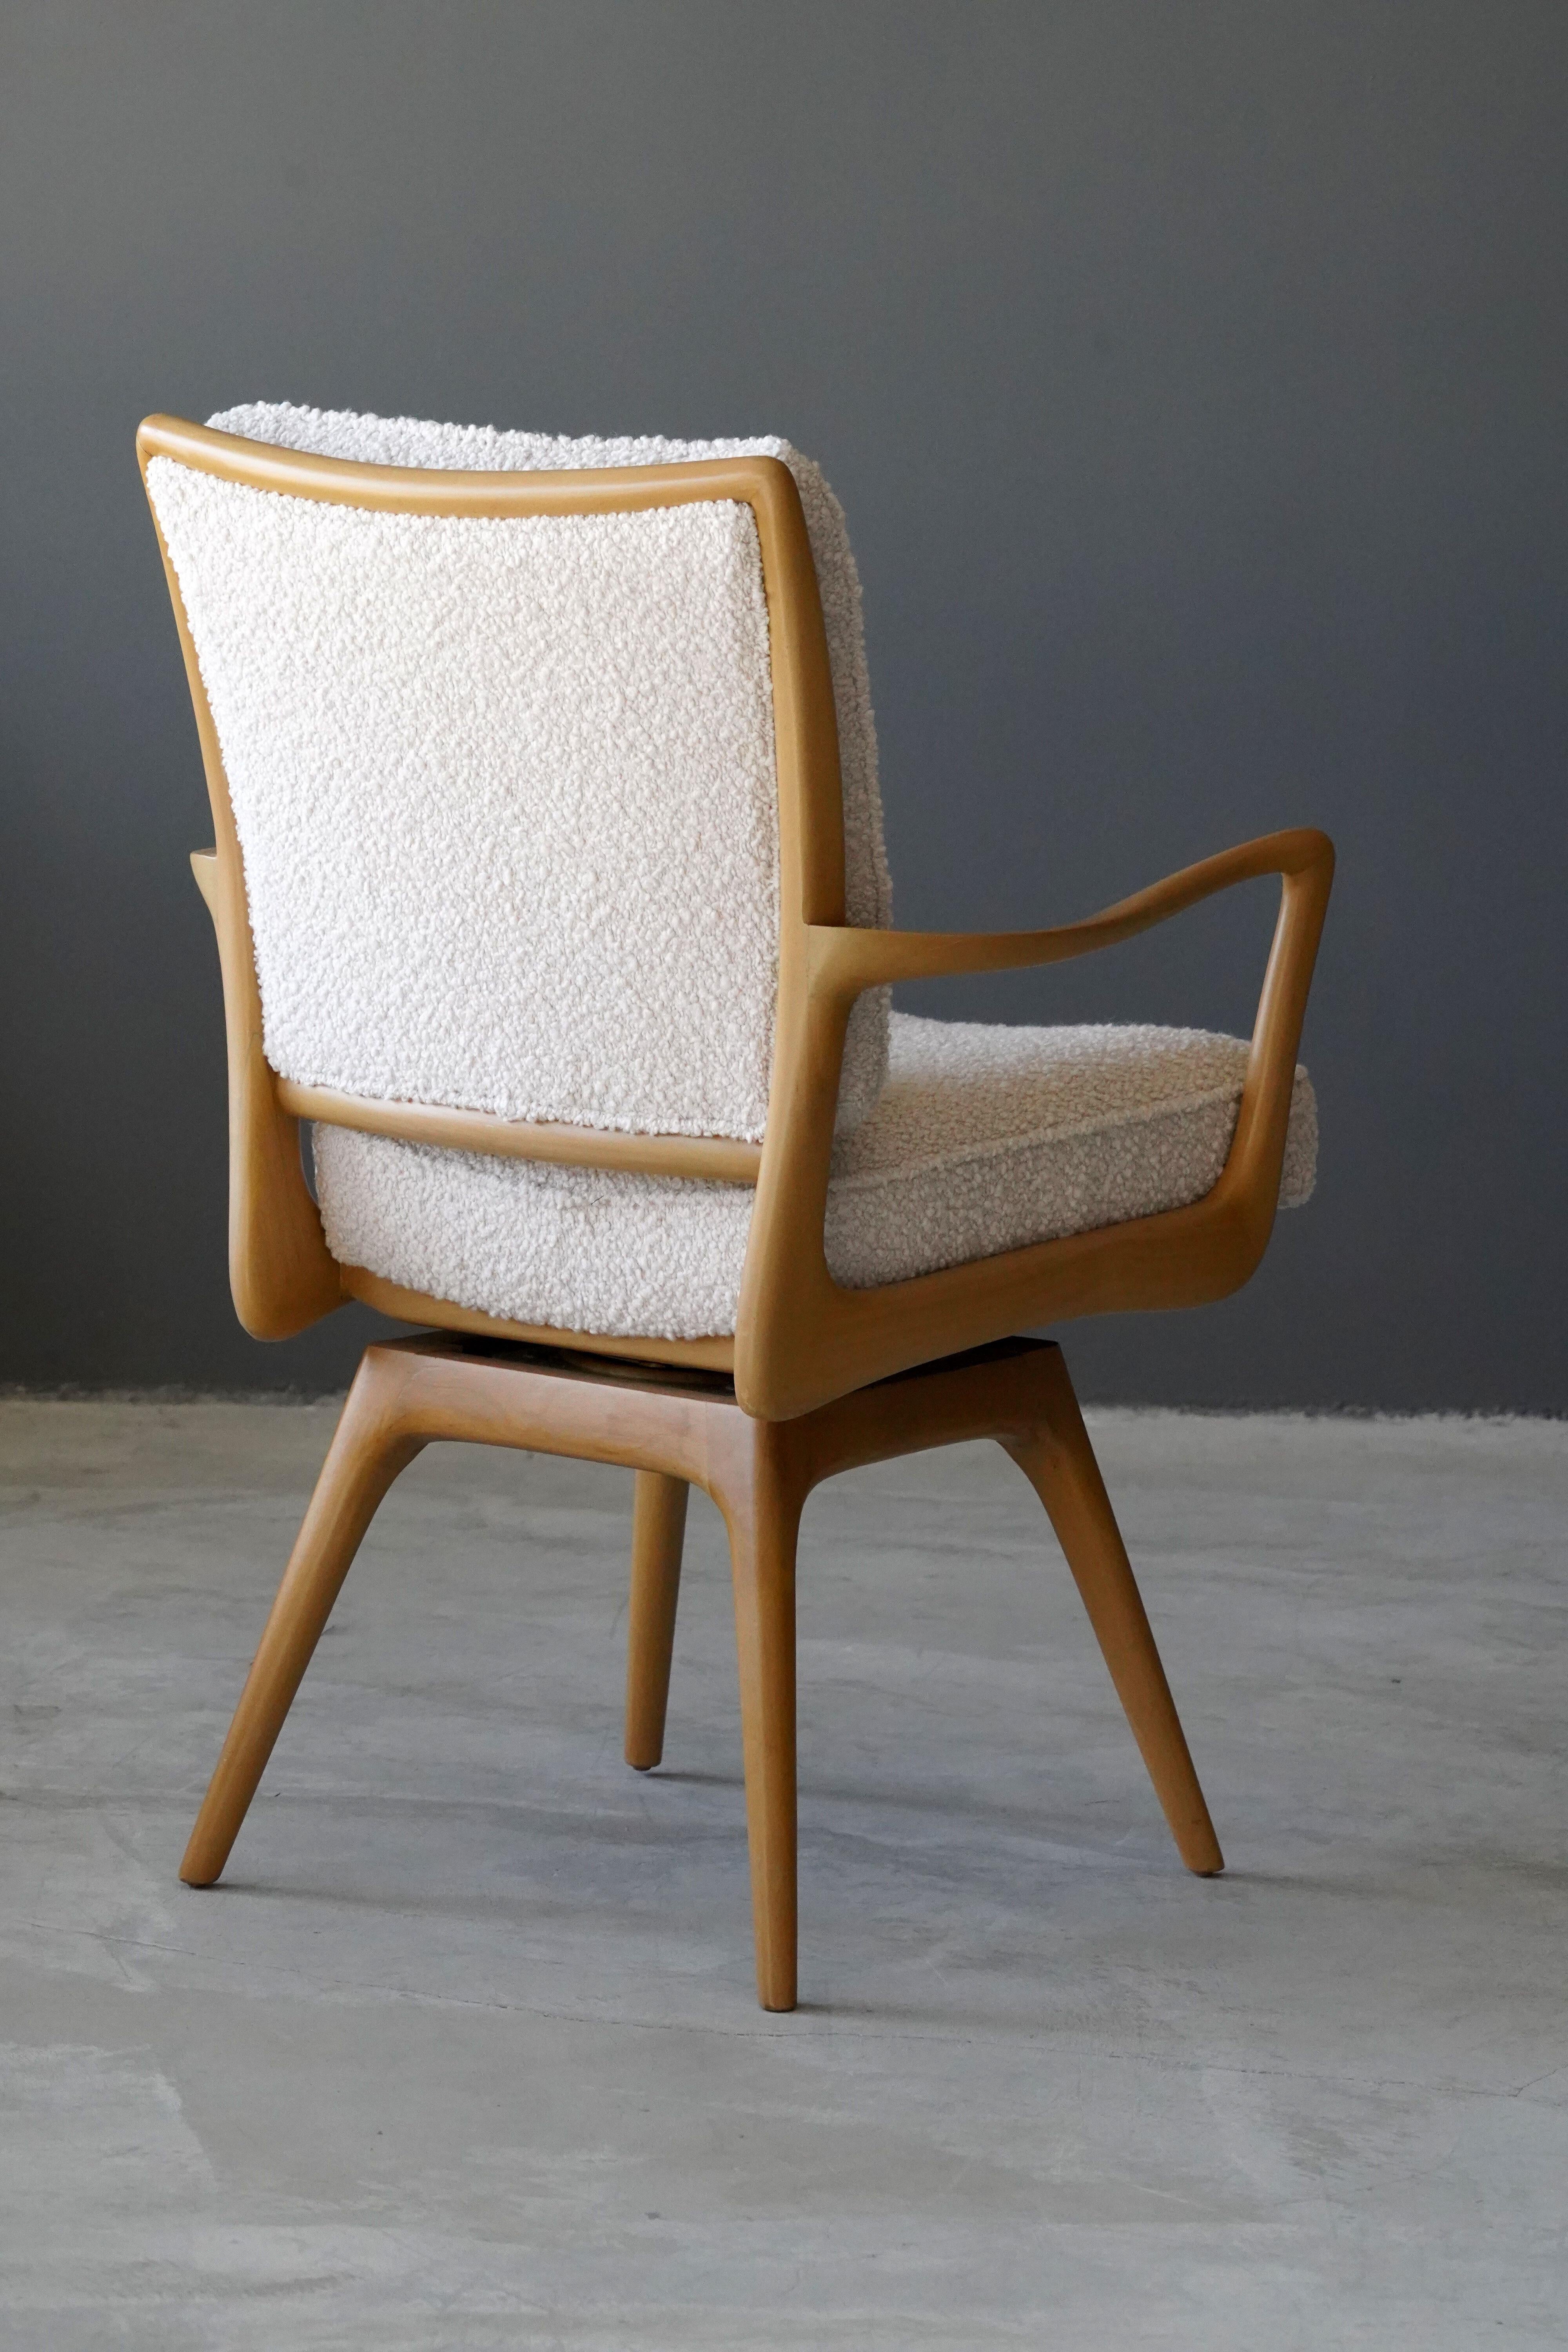 A swiveling organic armchair / desk chair designed by Vladimir Kagan. Organicly carved wood is paired with a high-end bouclé fabric. Produced by Kagan-Dreyfus, 1960s. With metal plaque. 

Other designers of the period include Paul Frankl, Gio